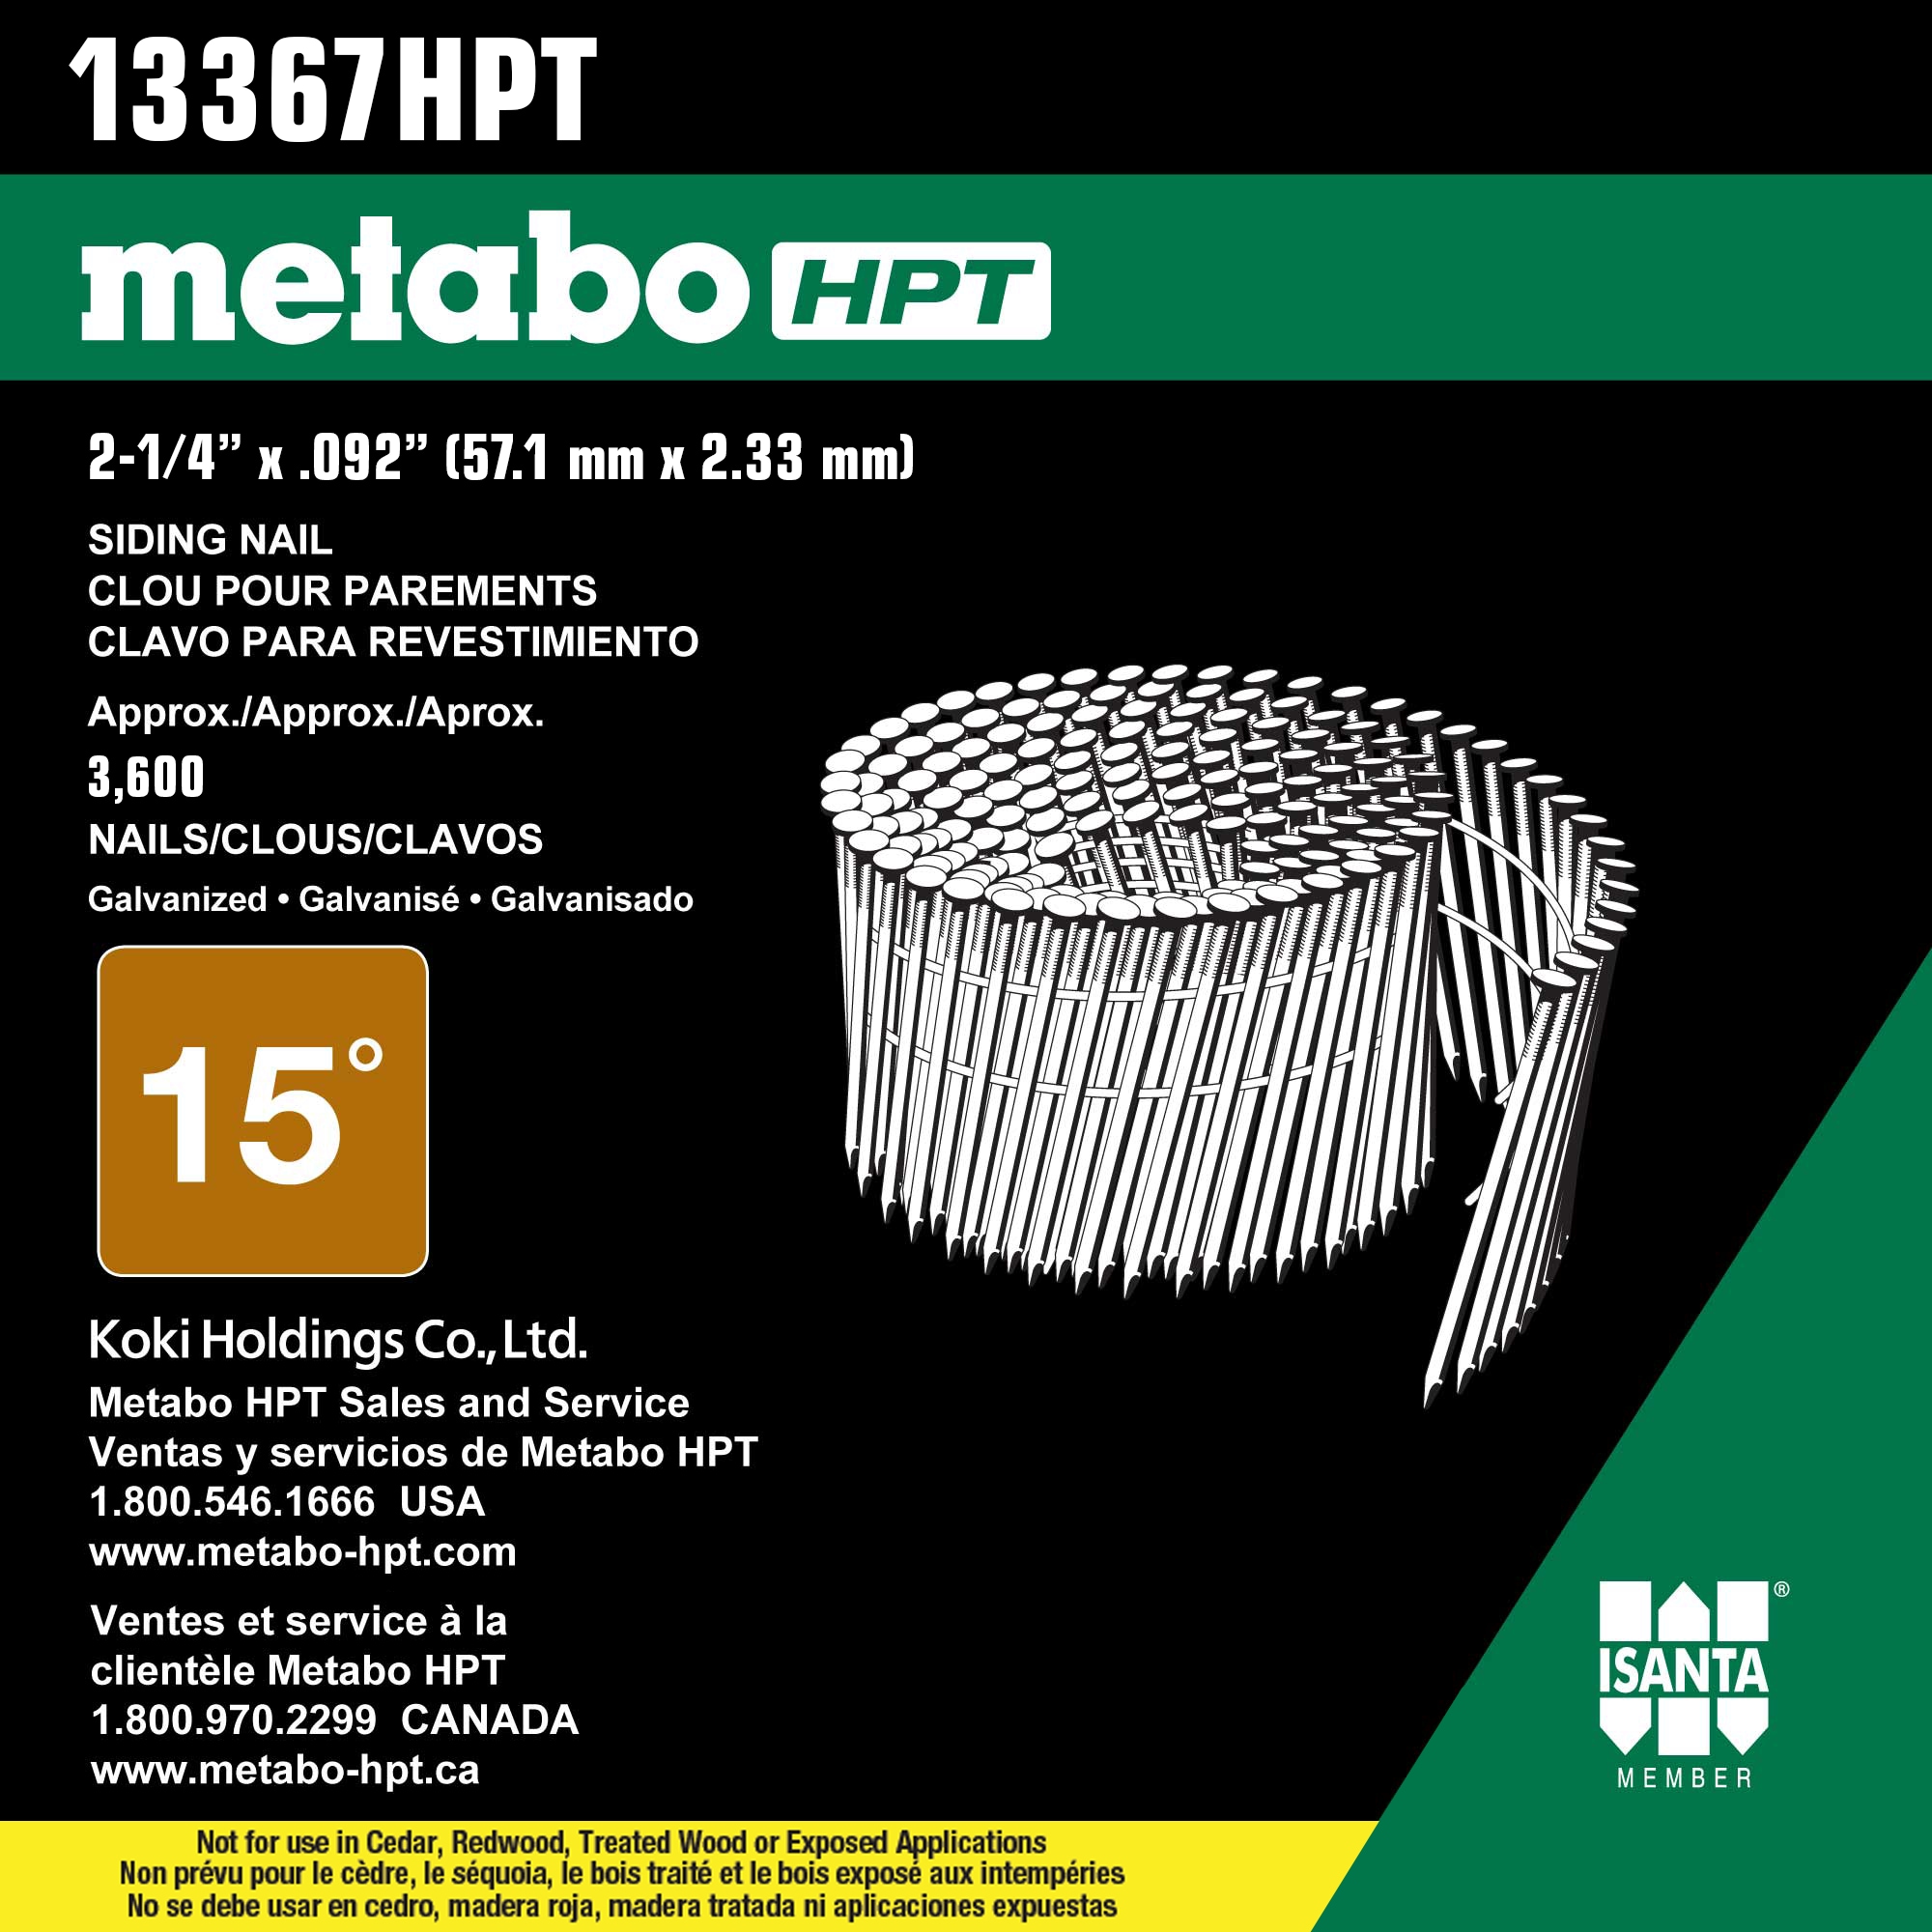 Metabo HPT 2-1/4-in 16-Gauge Siding Nails (3600-Per Box) in the